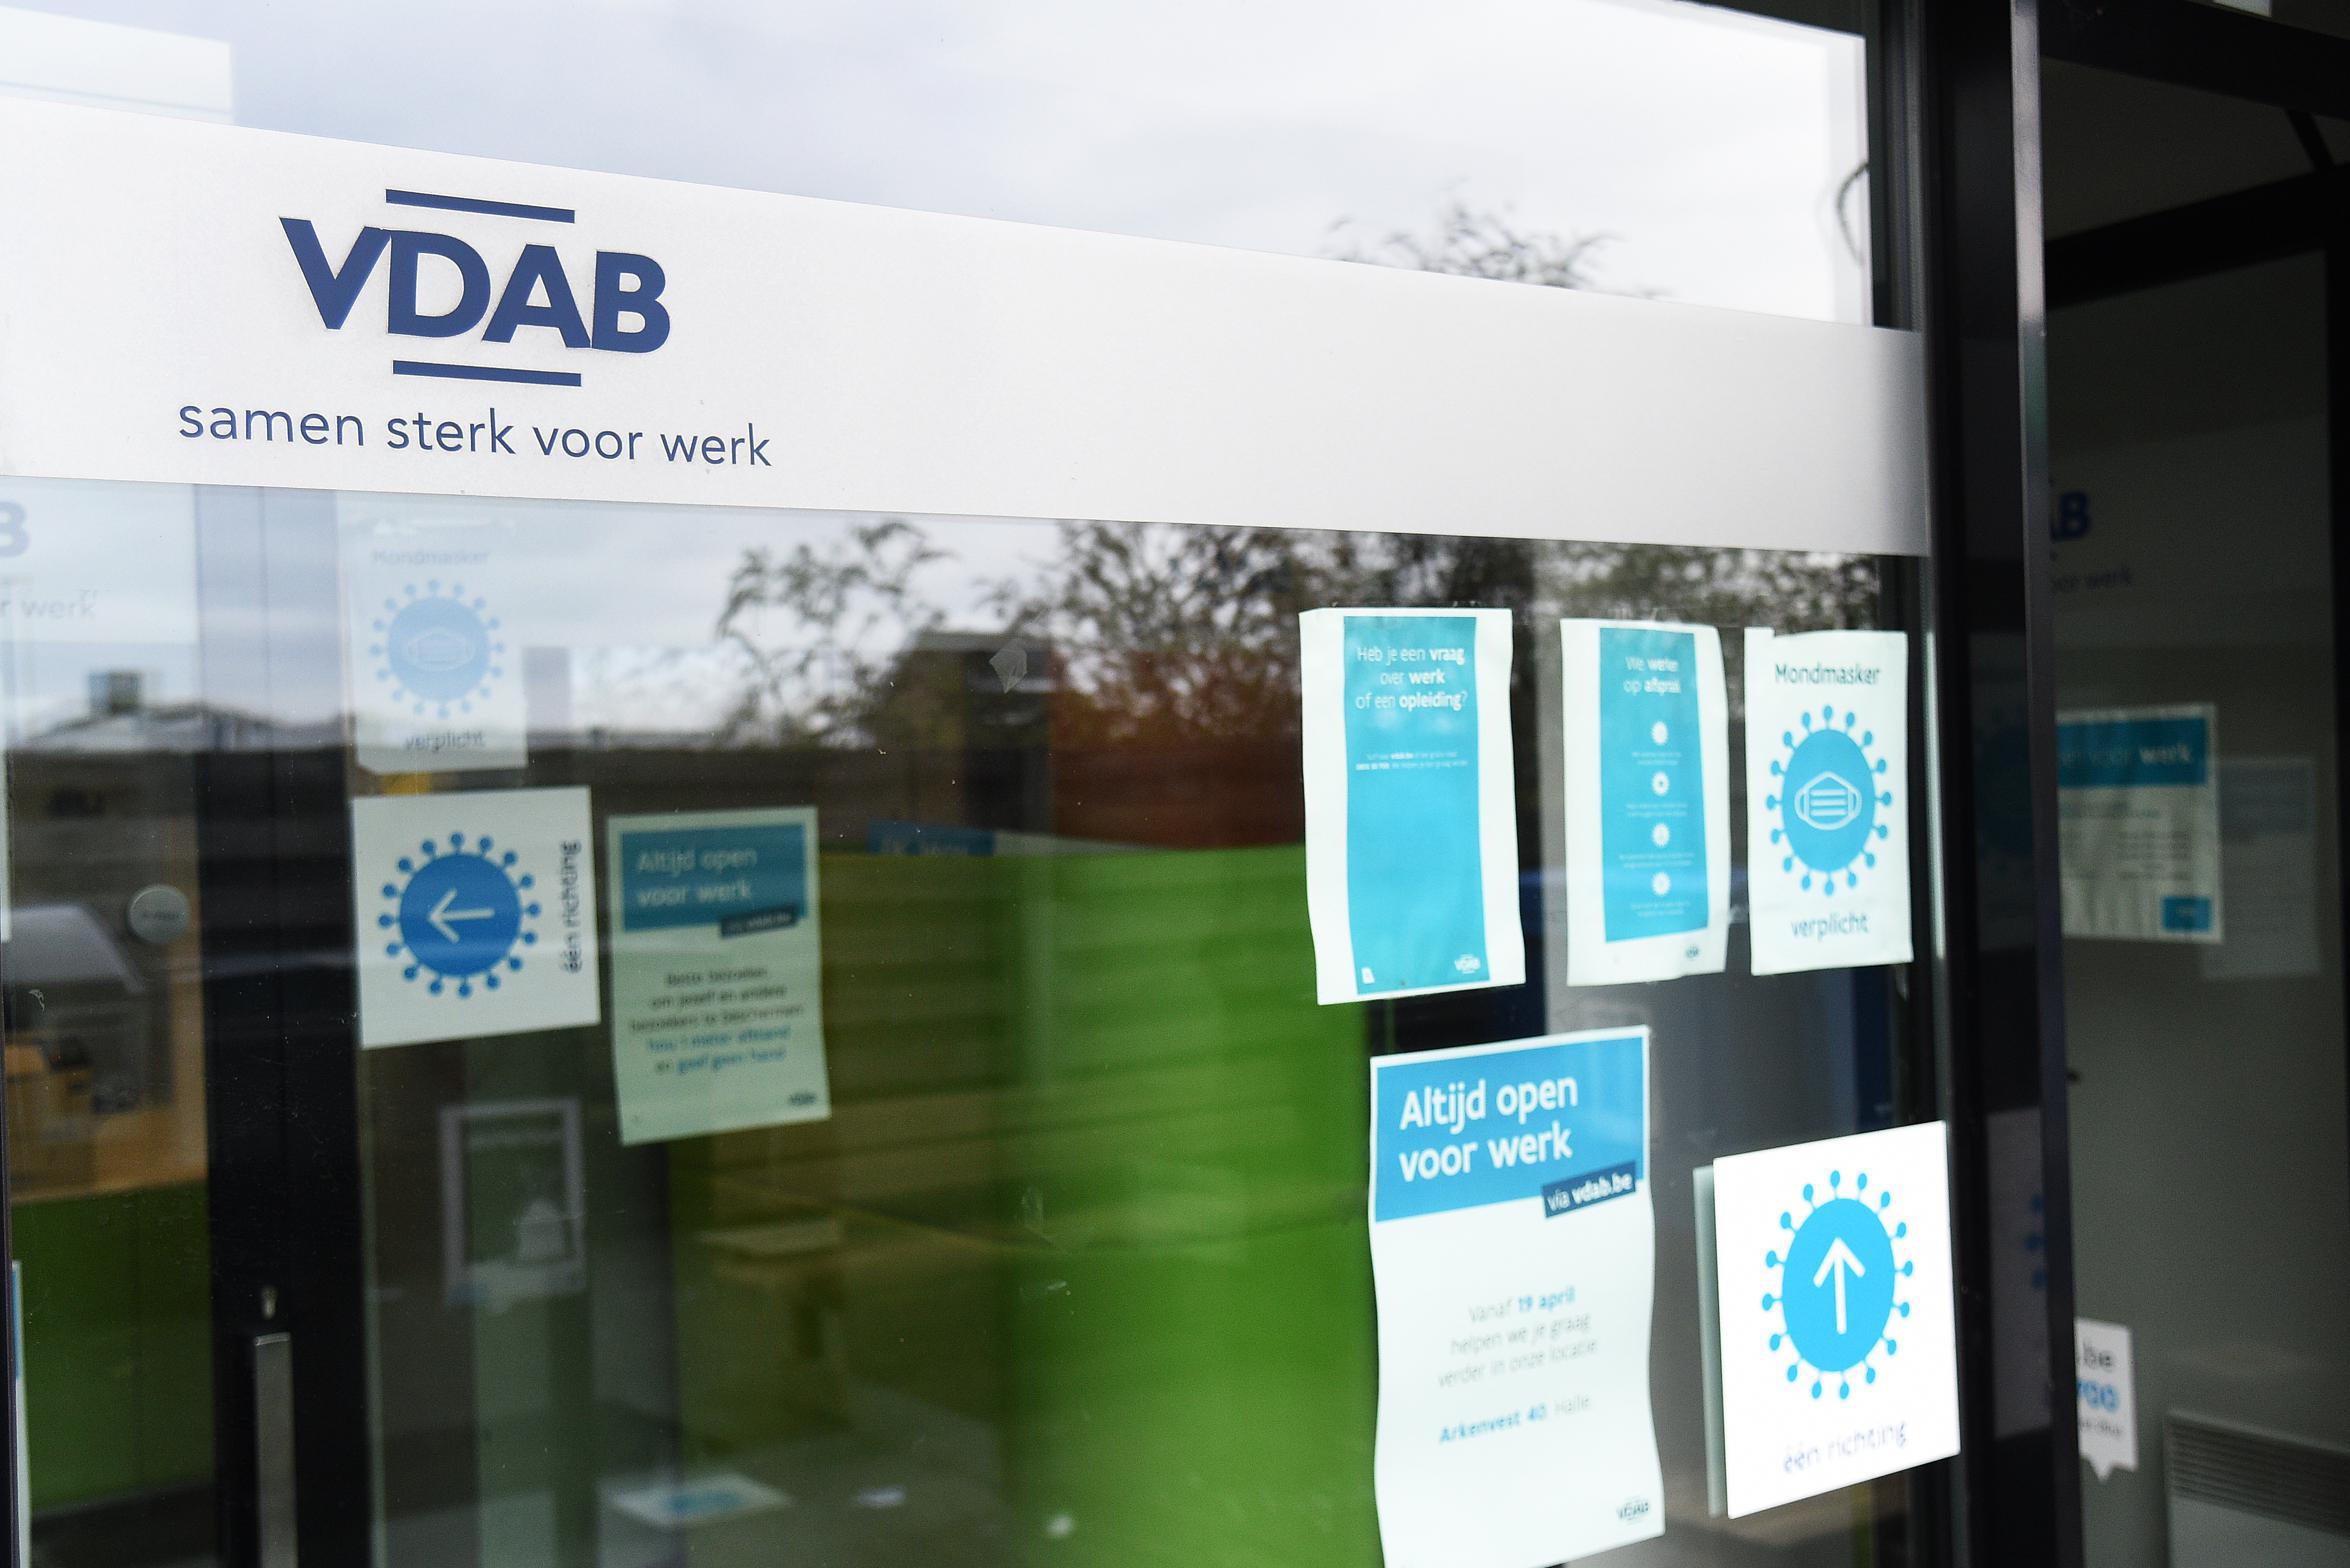 One in five job seekers does not show up for an appointment with the VDAB mediator